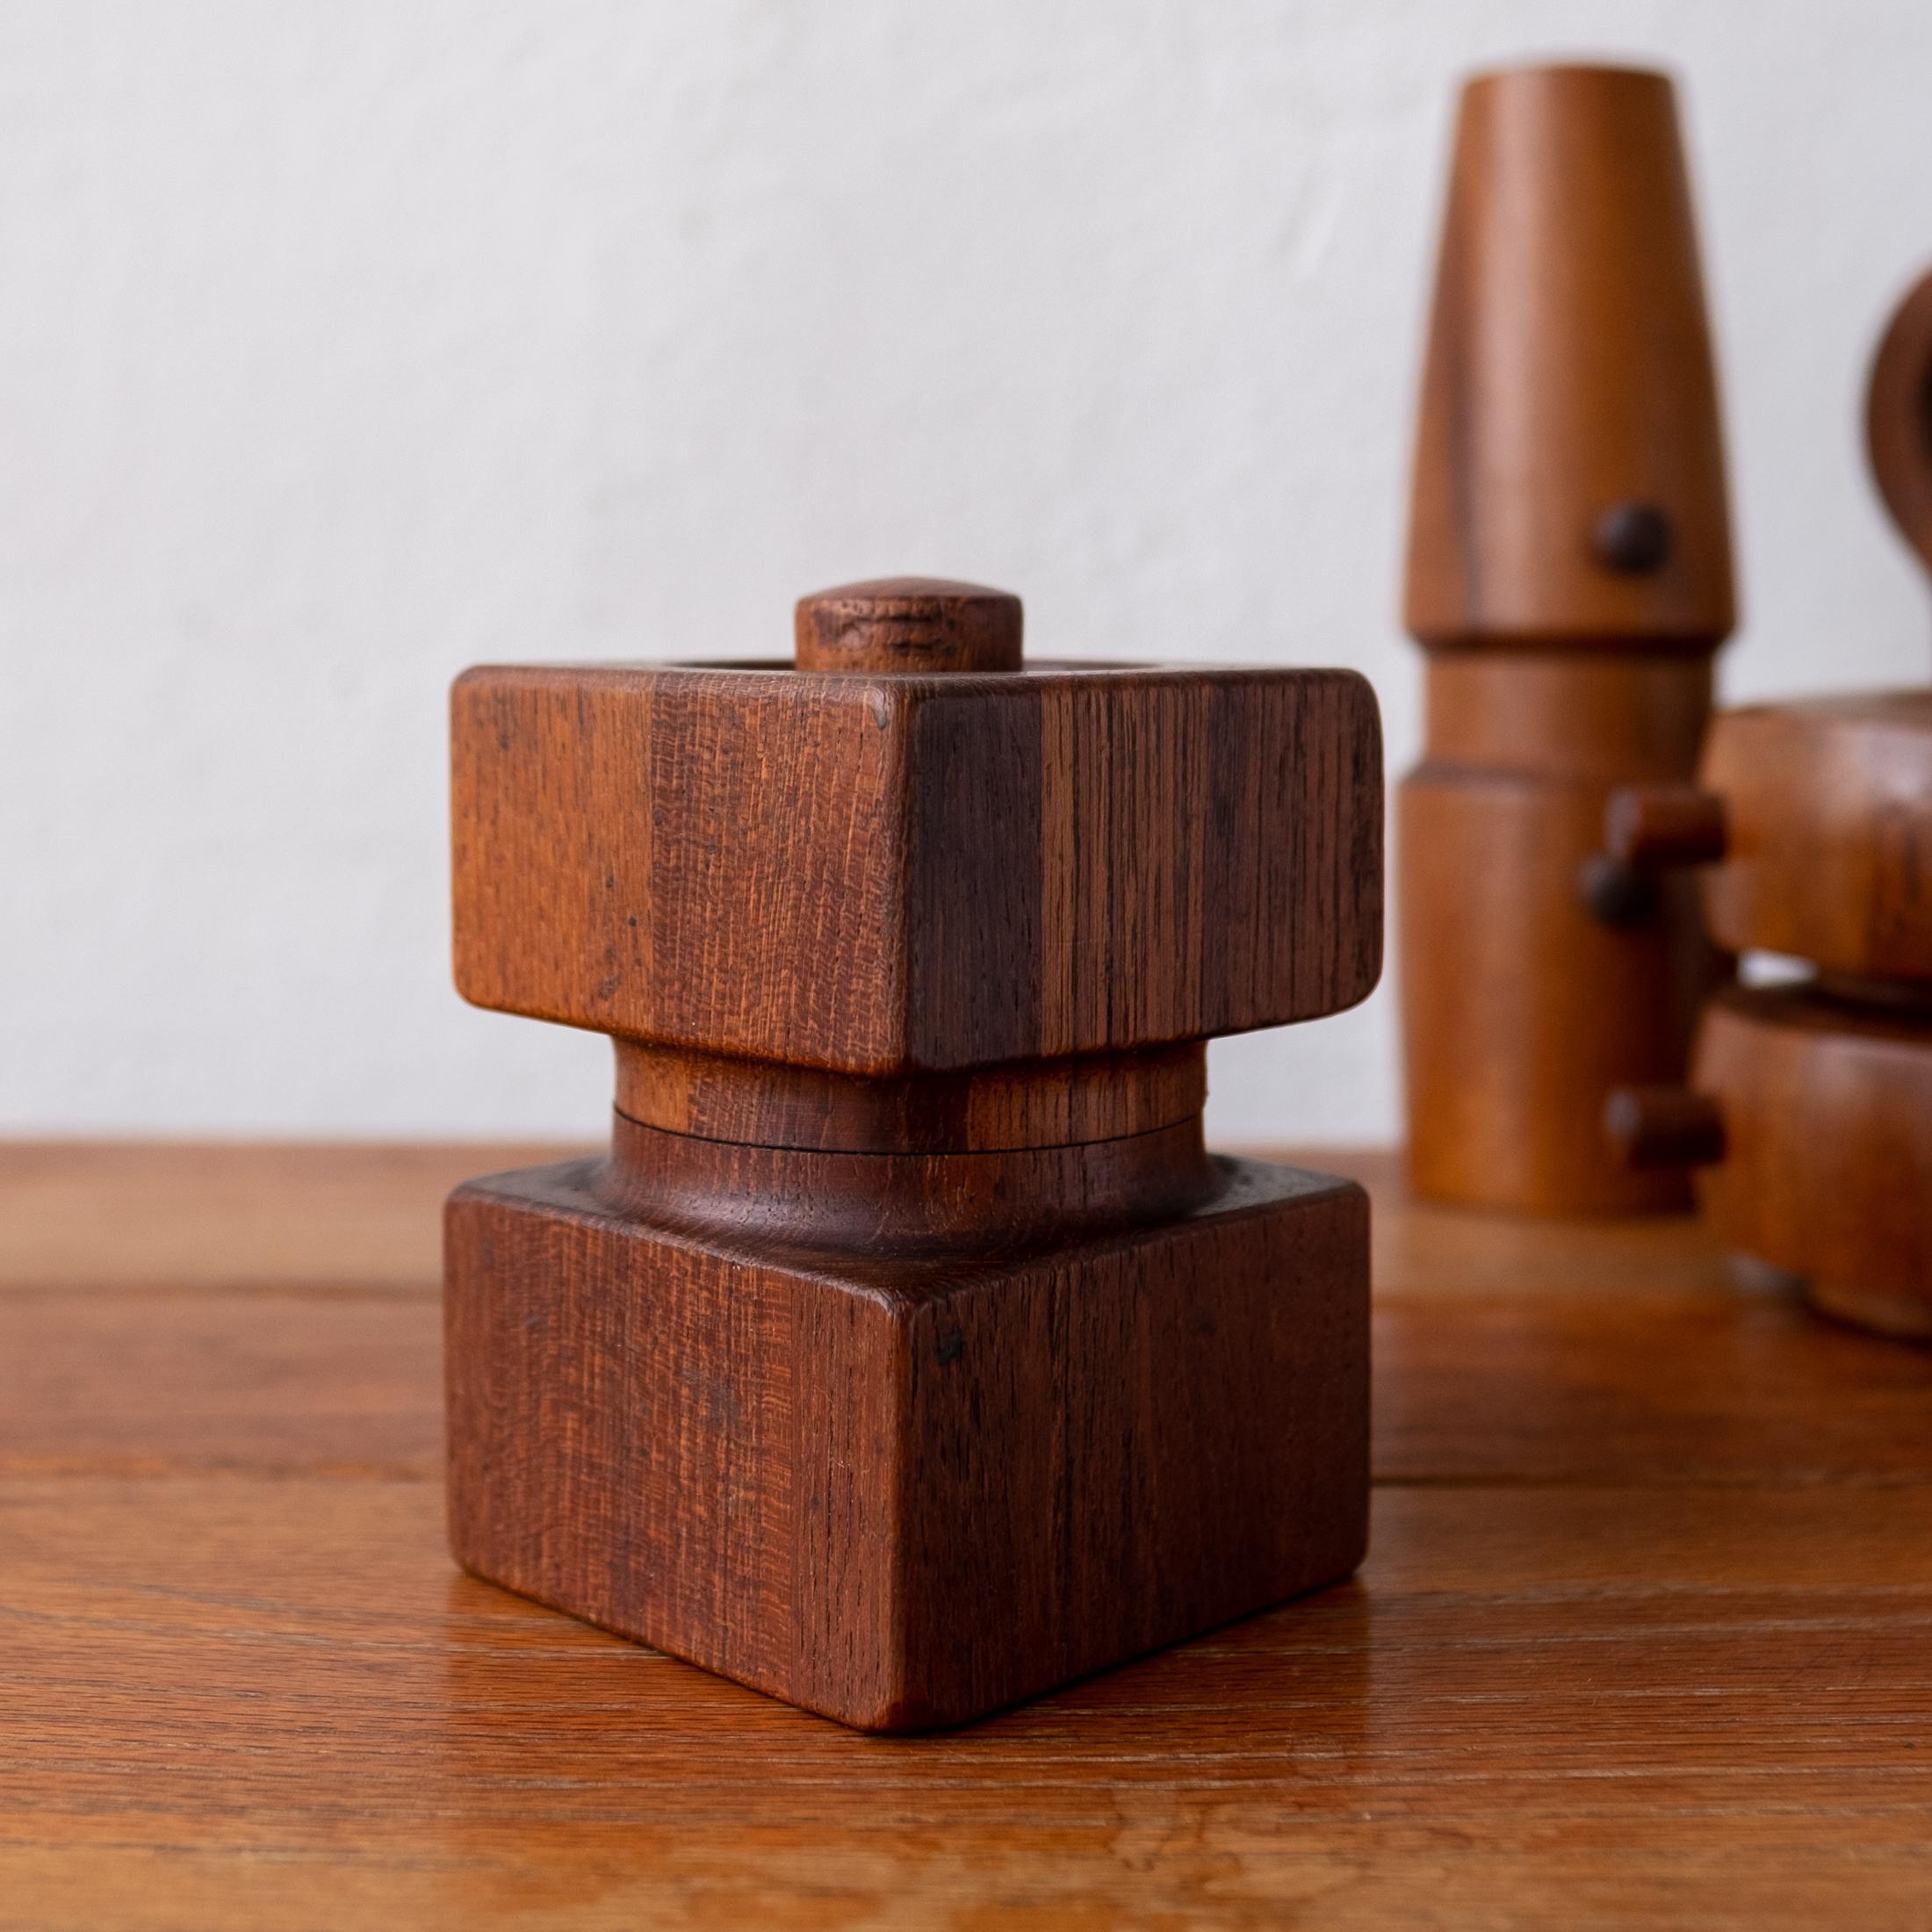 Collection of four teak pepper mills by Jens Quistgaard. Most are early metal grinding mechanisms produced by Peugeot. The mills were all produced by Dansk in Denmark, circa 1960s. 

 